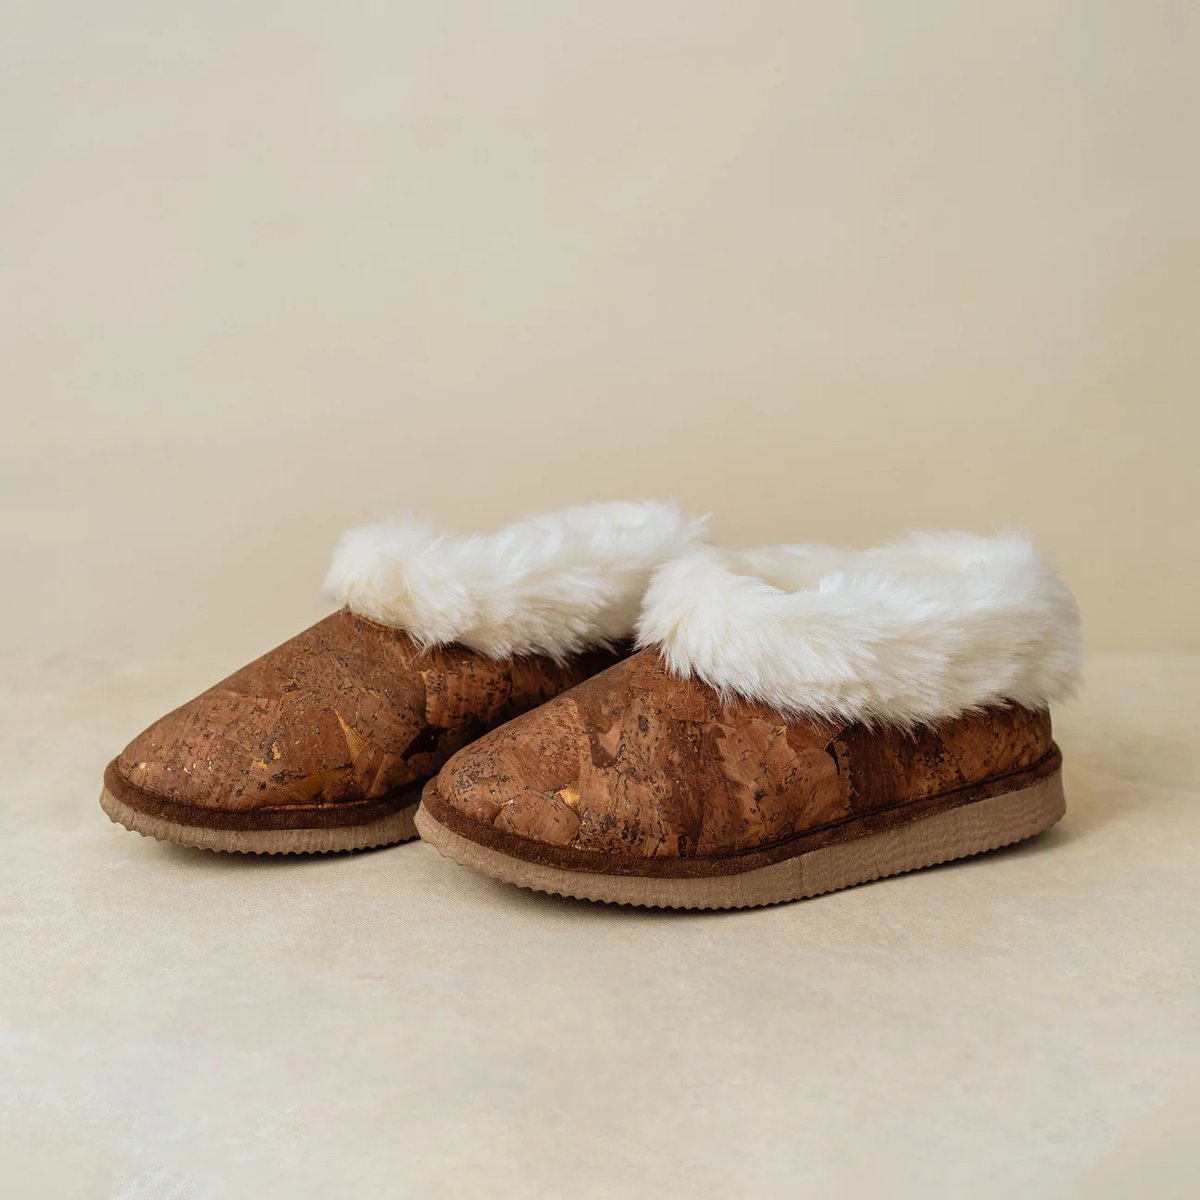 Stepping into comfort and style over here...
#canadianmade #canadianslippers #canadianmom #canadianwoman #womensslippers #madeincanada #shopcanadian #fall2023 #winter2023 #lifeincanada